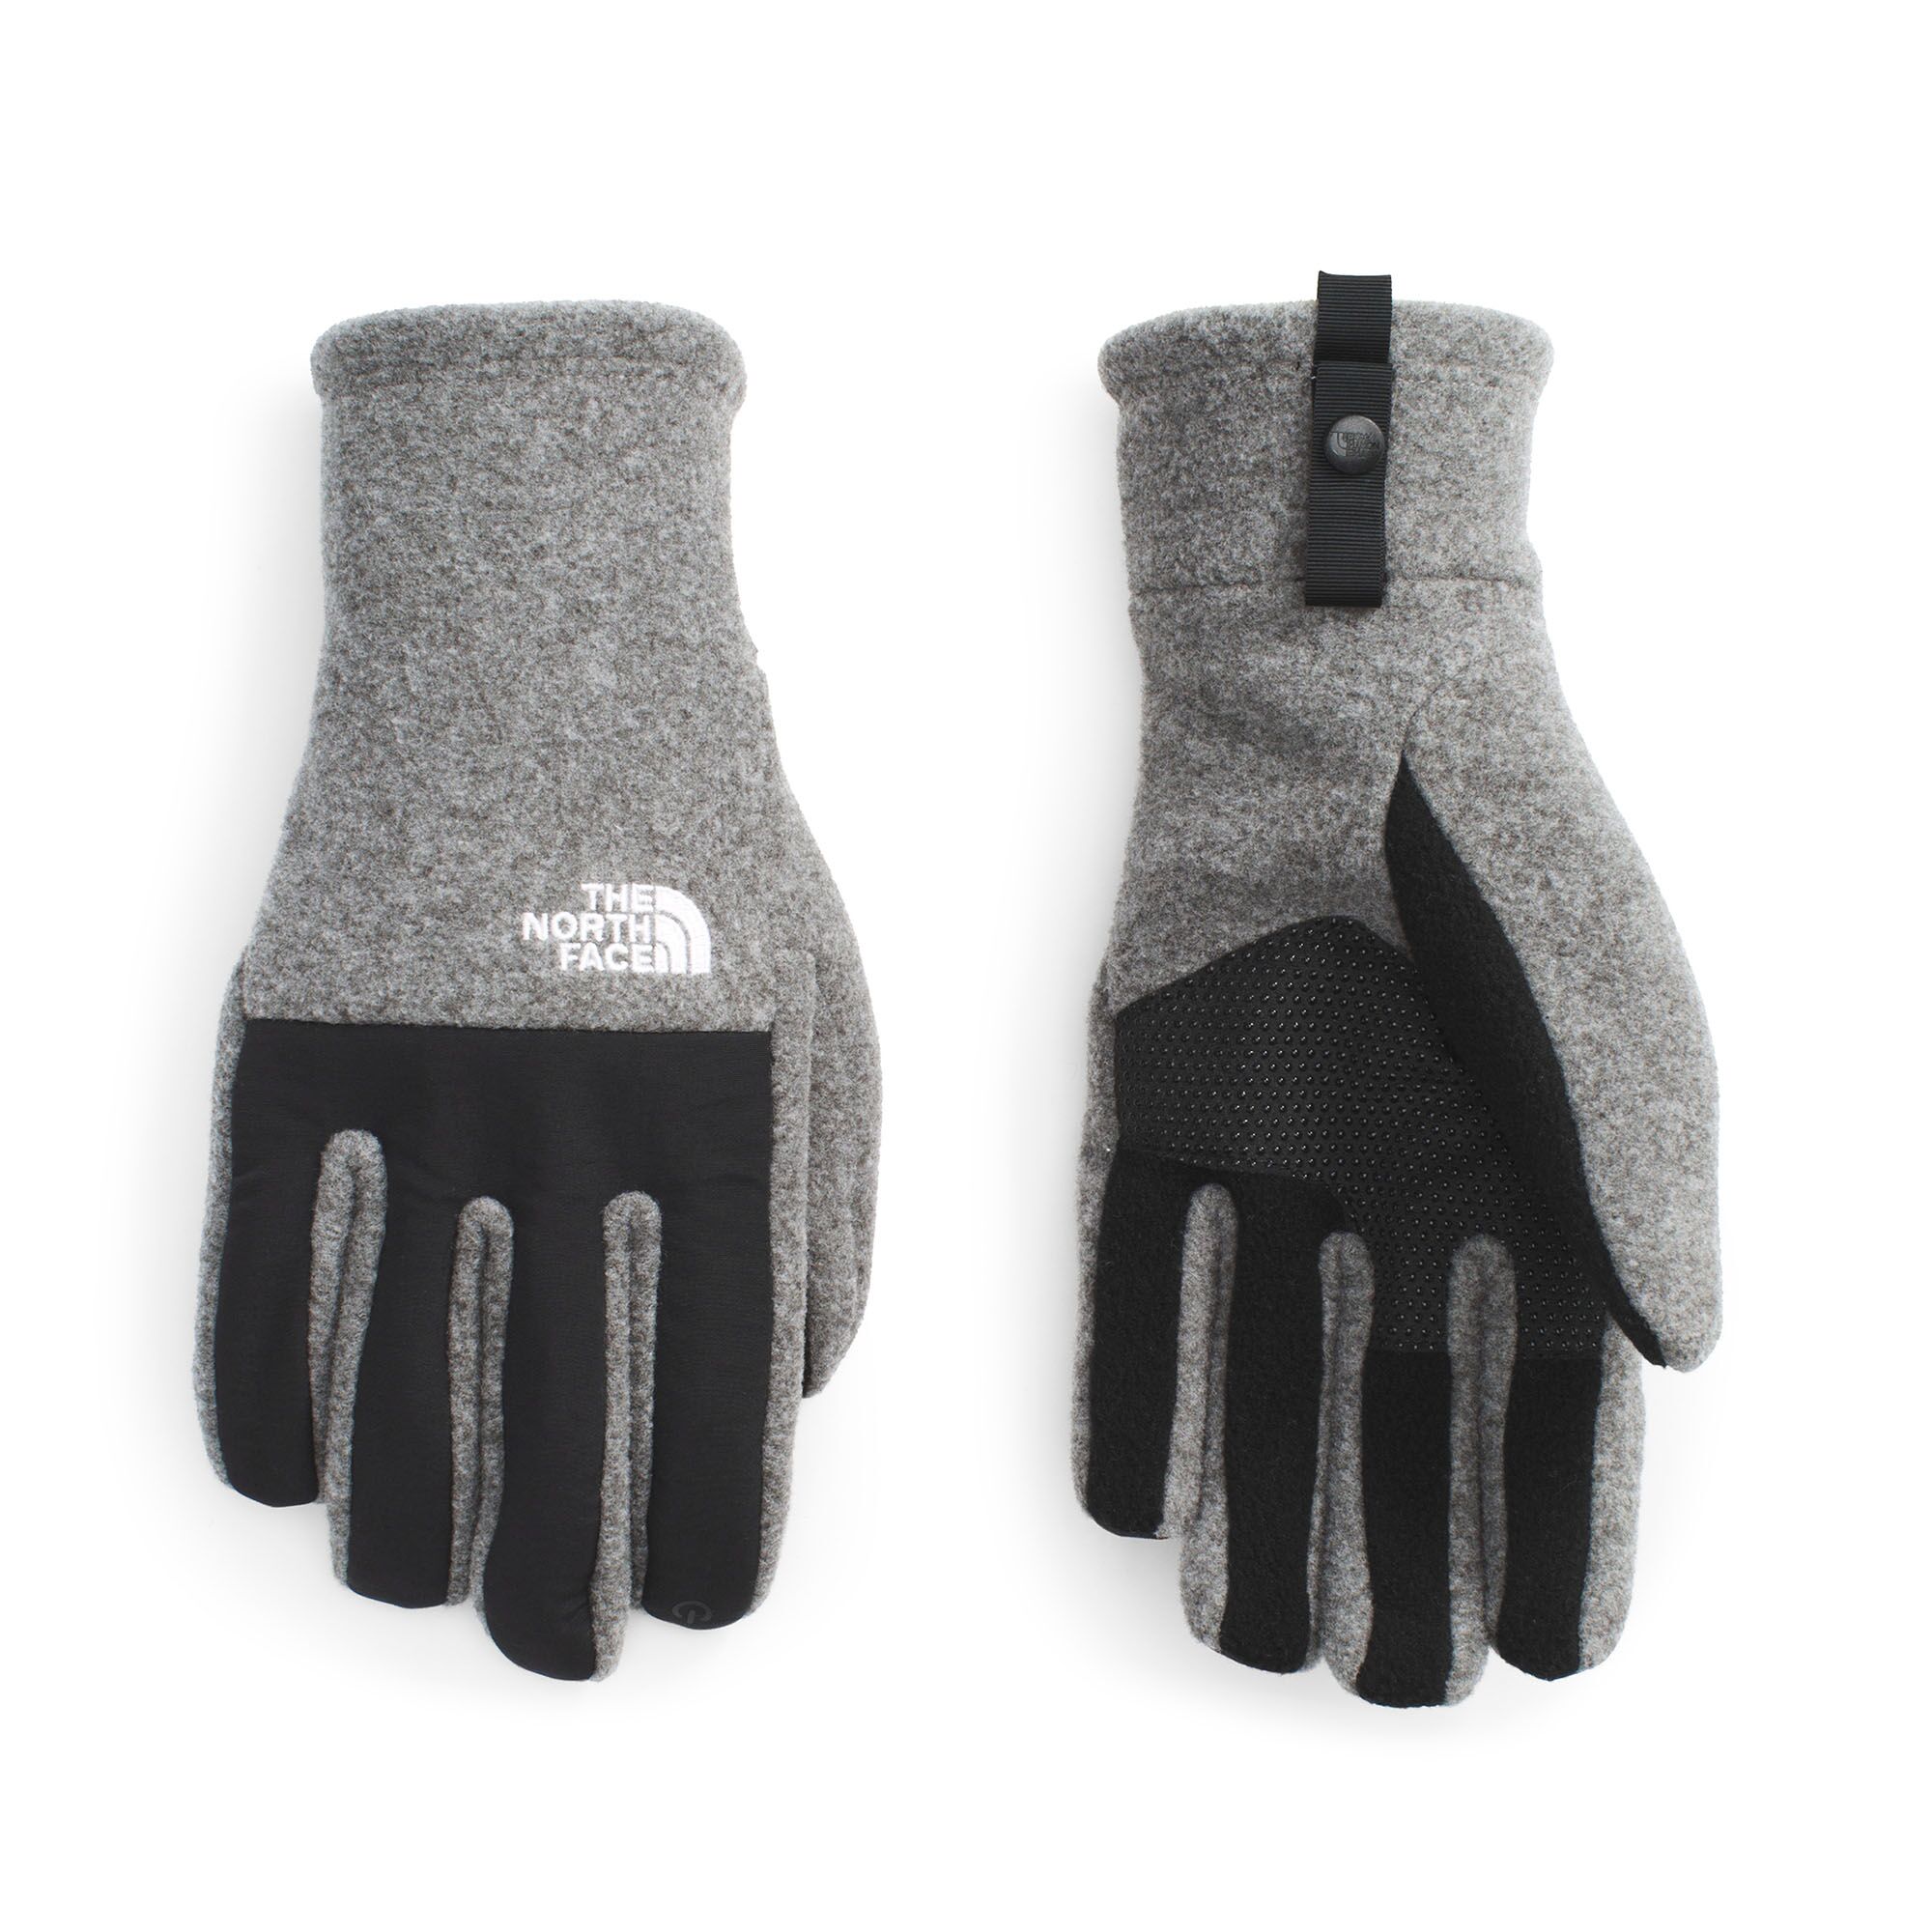 These gloves, made from recycled polyester, are thin enough to allow all-conditions touchscreen functionality. 